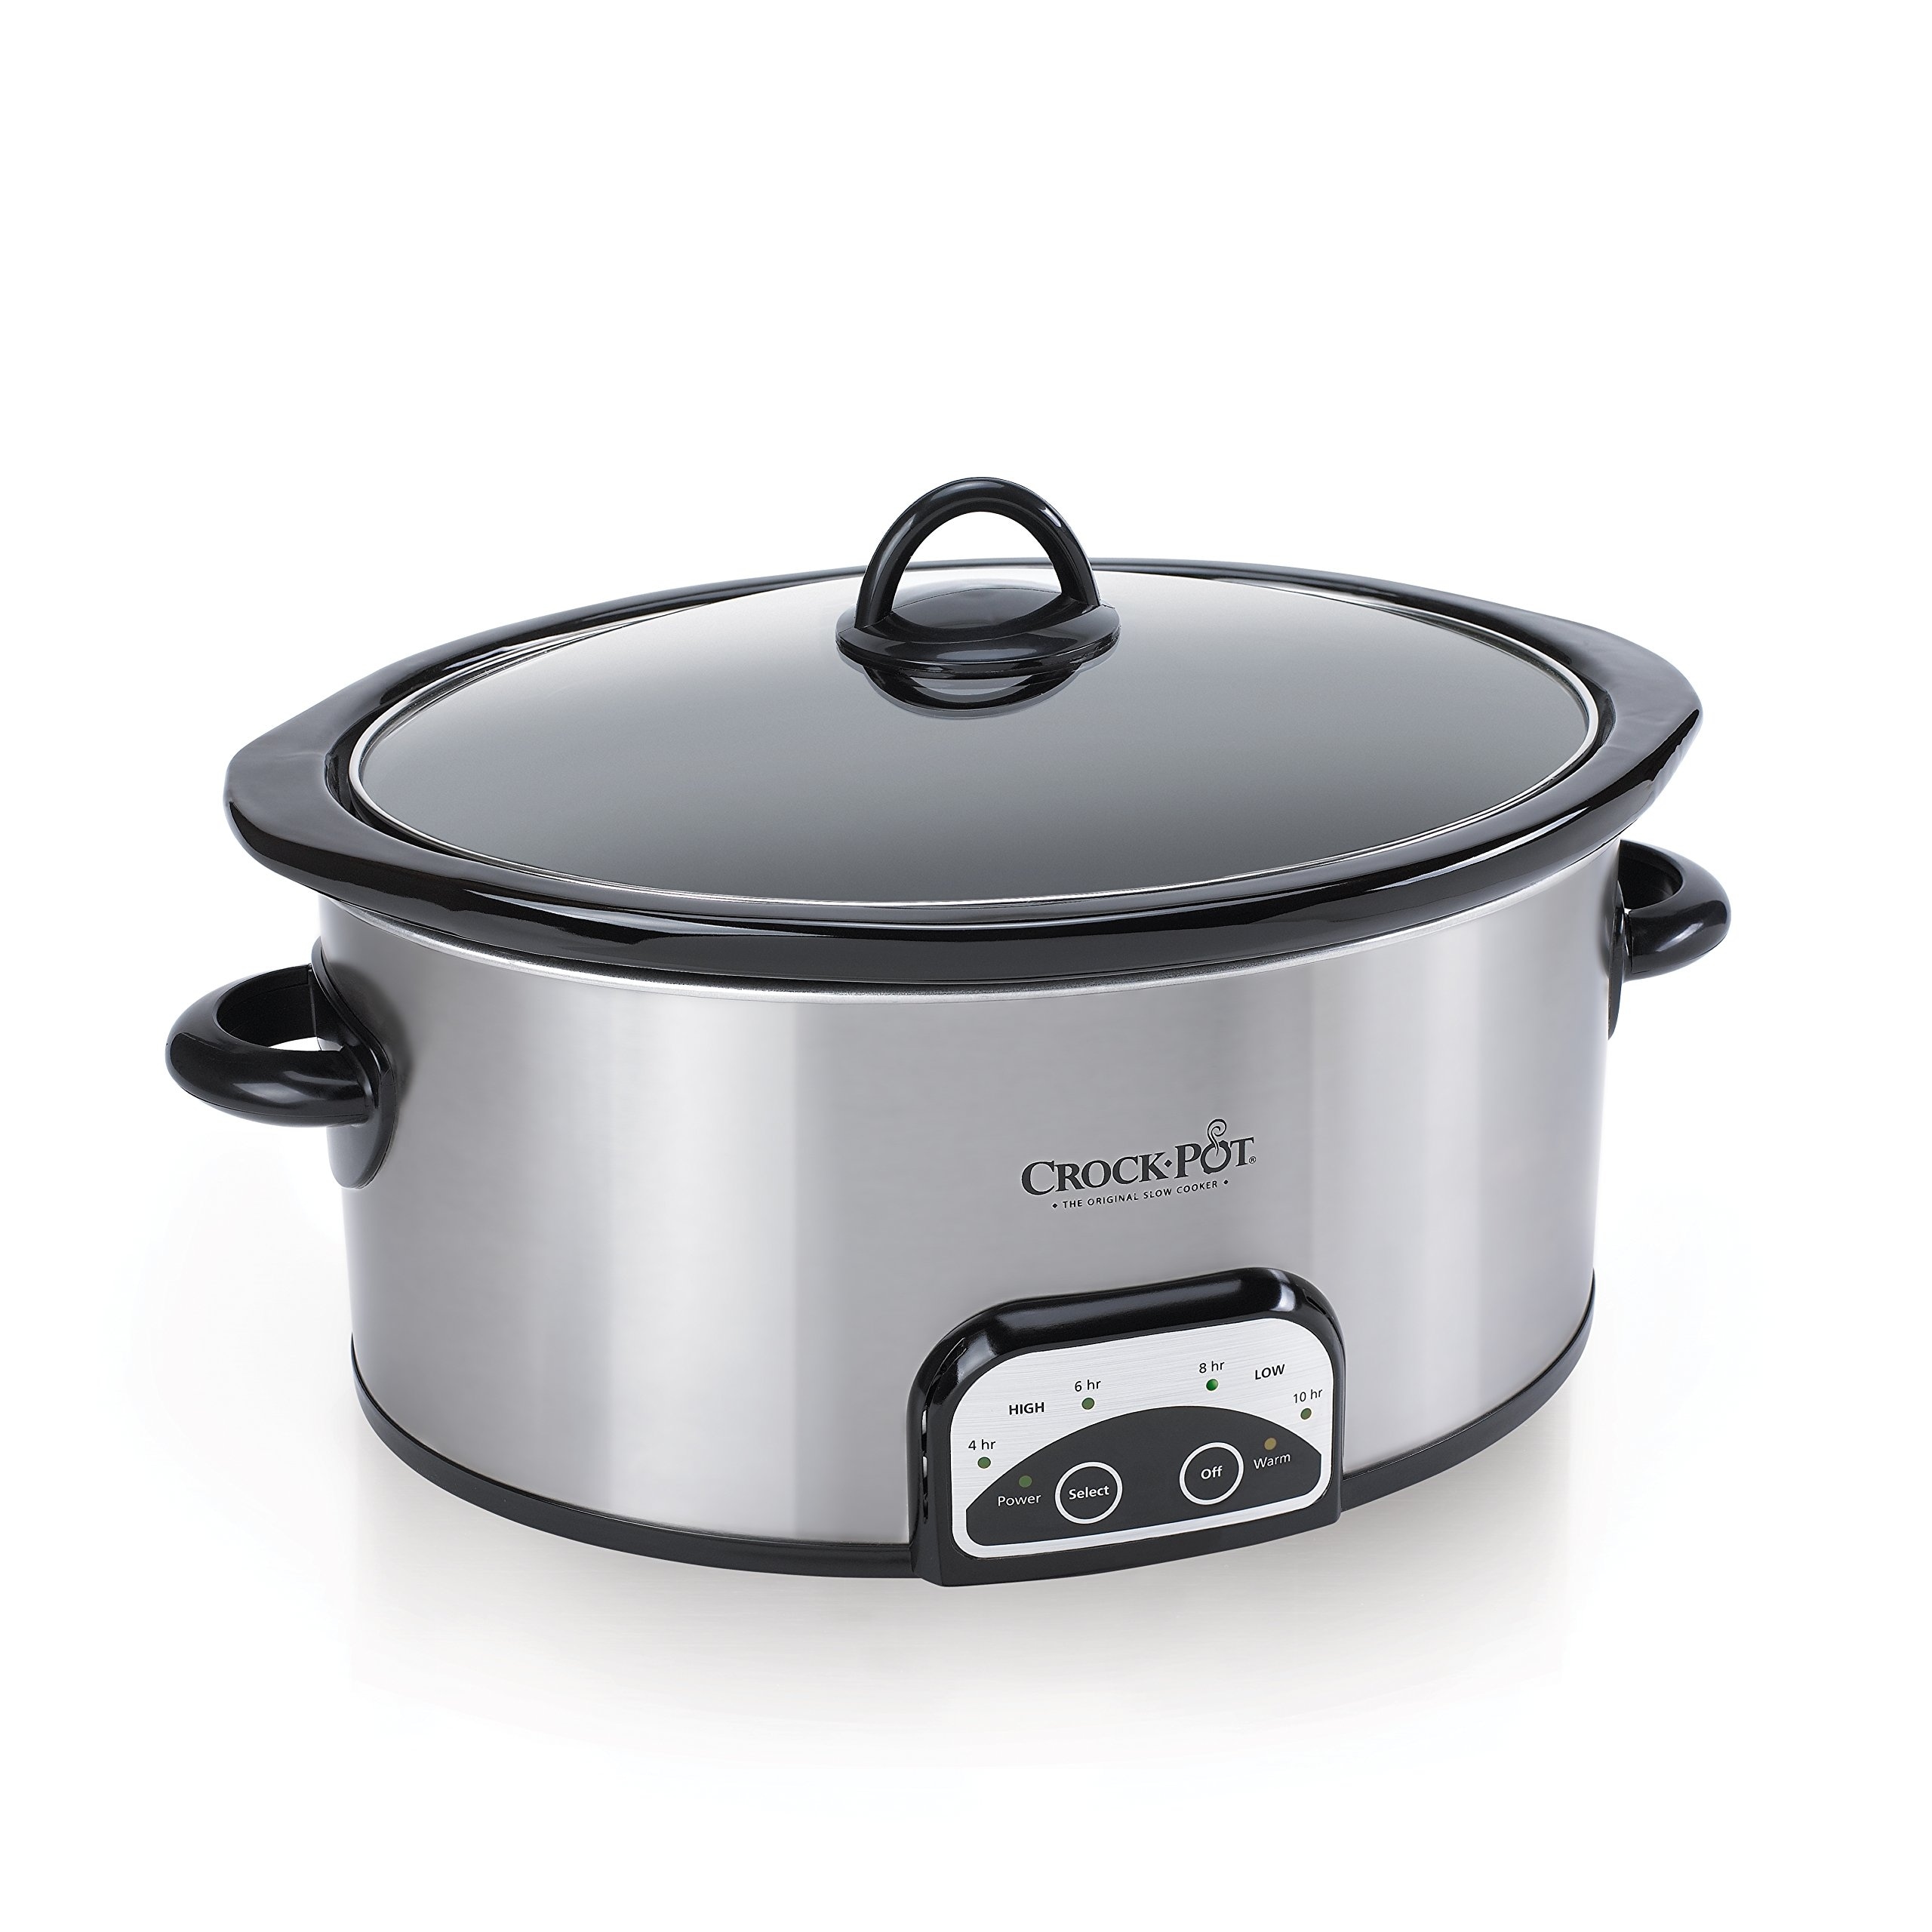 Slow Cooker Cuisinart 3.5 Quart Programmable, Brushed Stainless